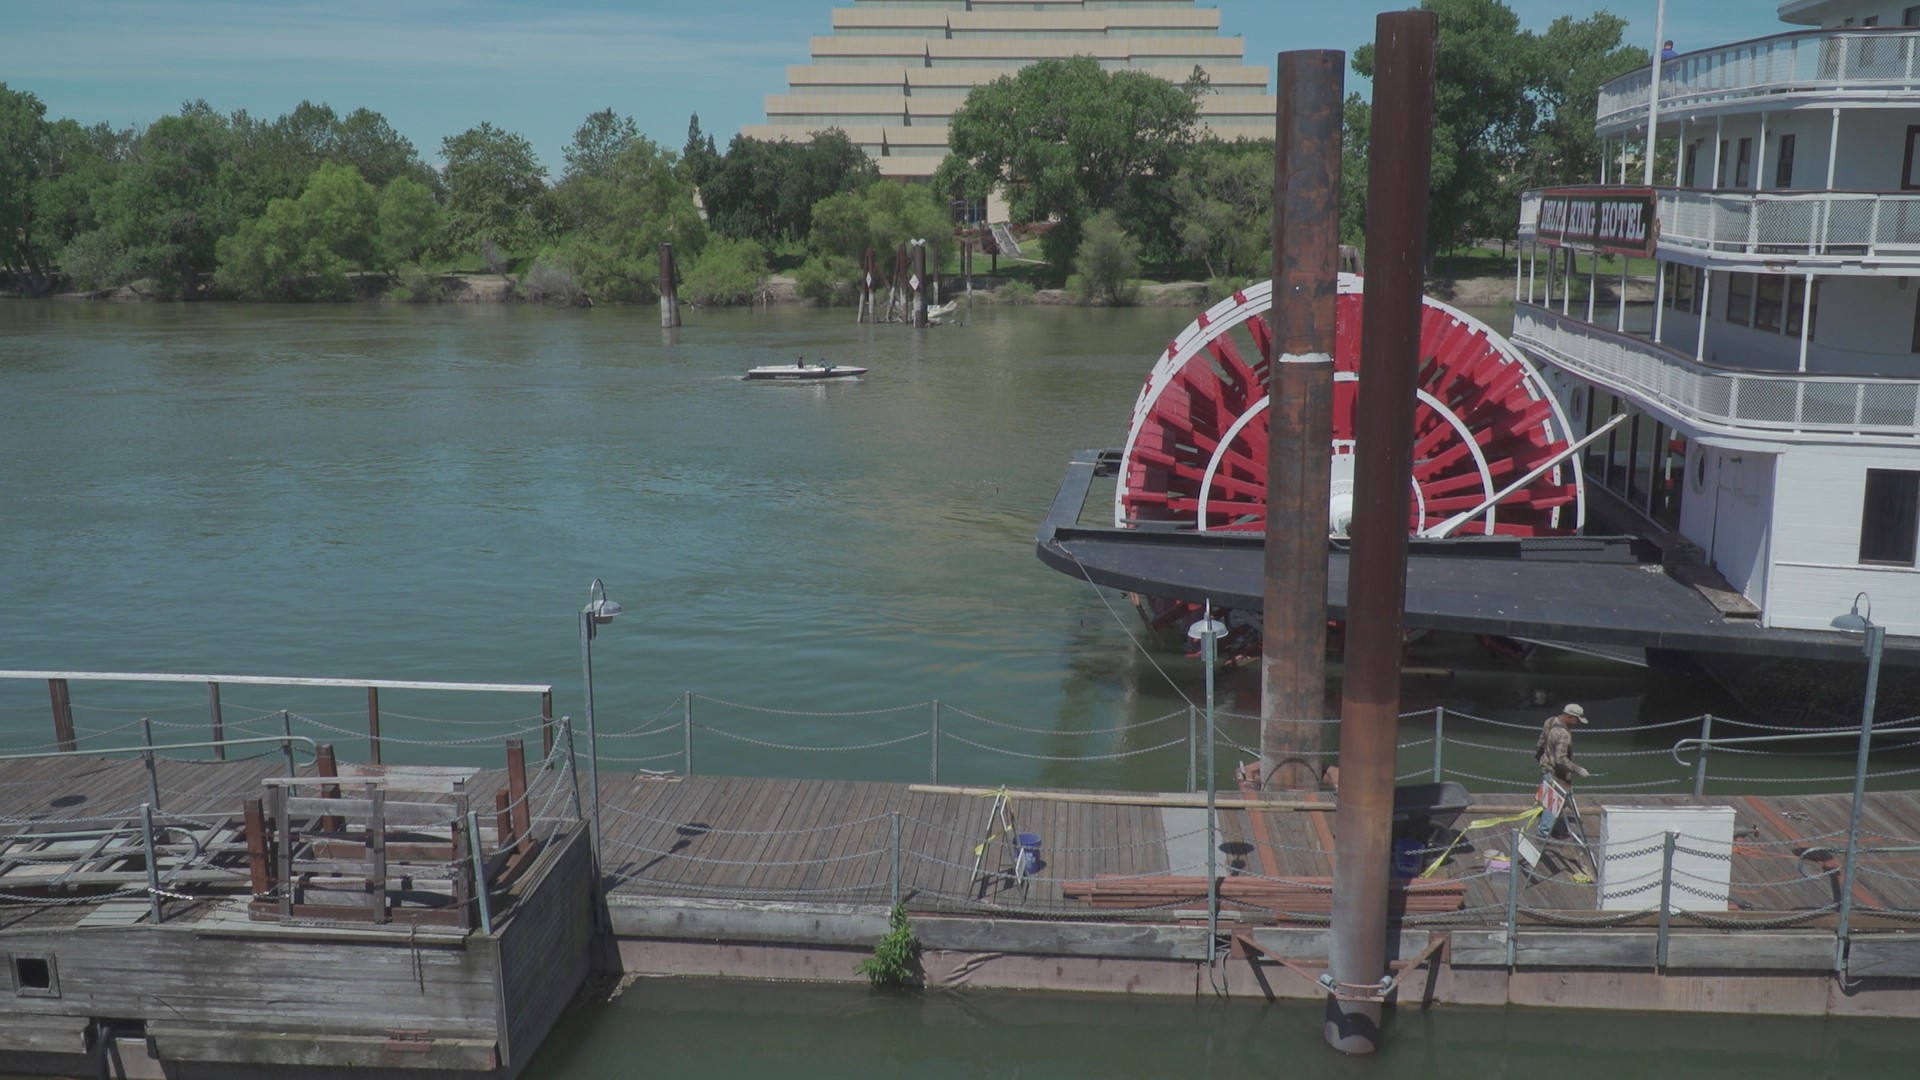 Sacramento and West Sacramento city leaders are asking for the community's help in naming the docks on both sides of the river.